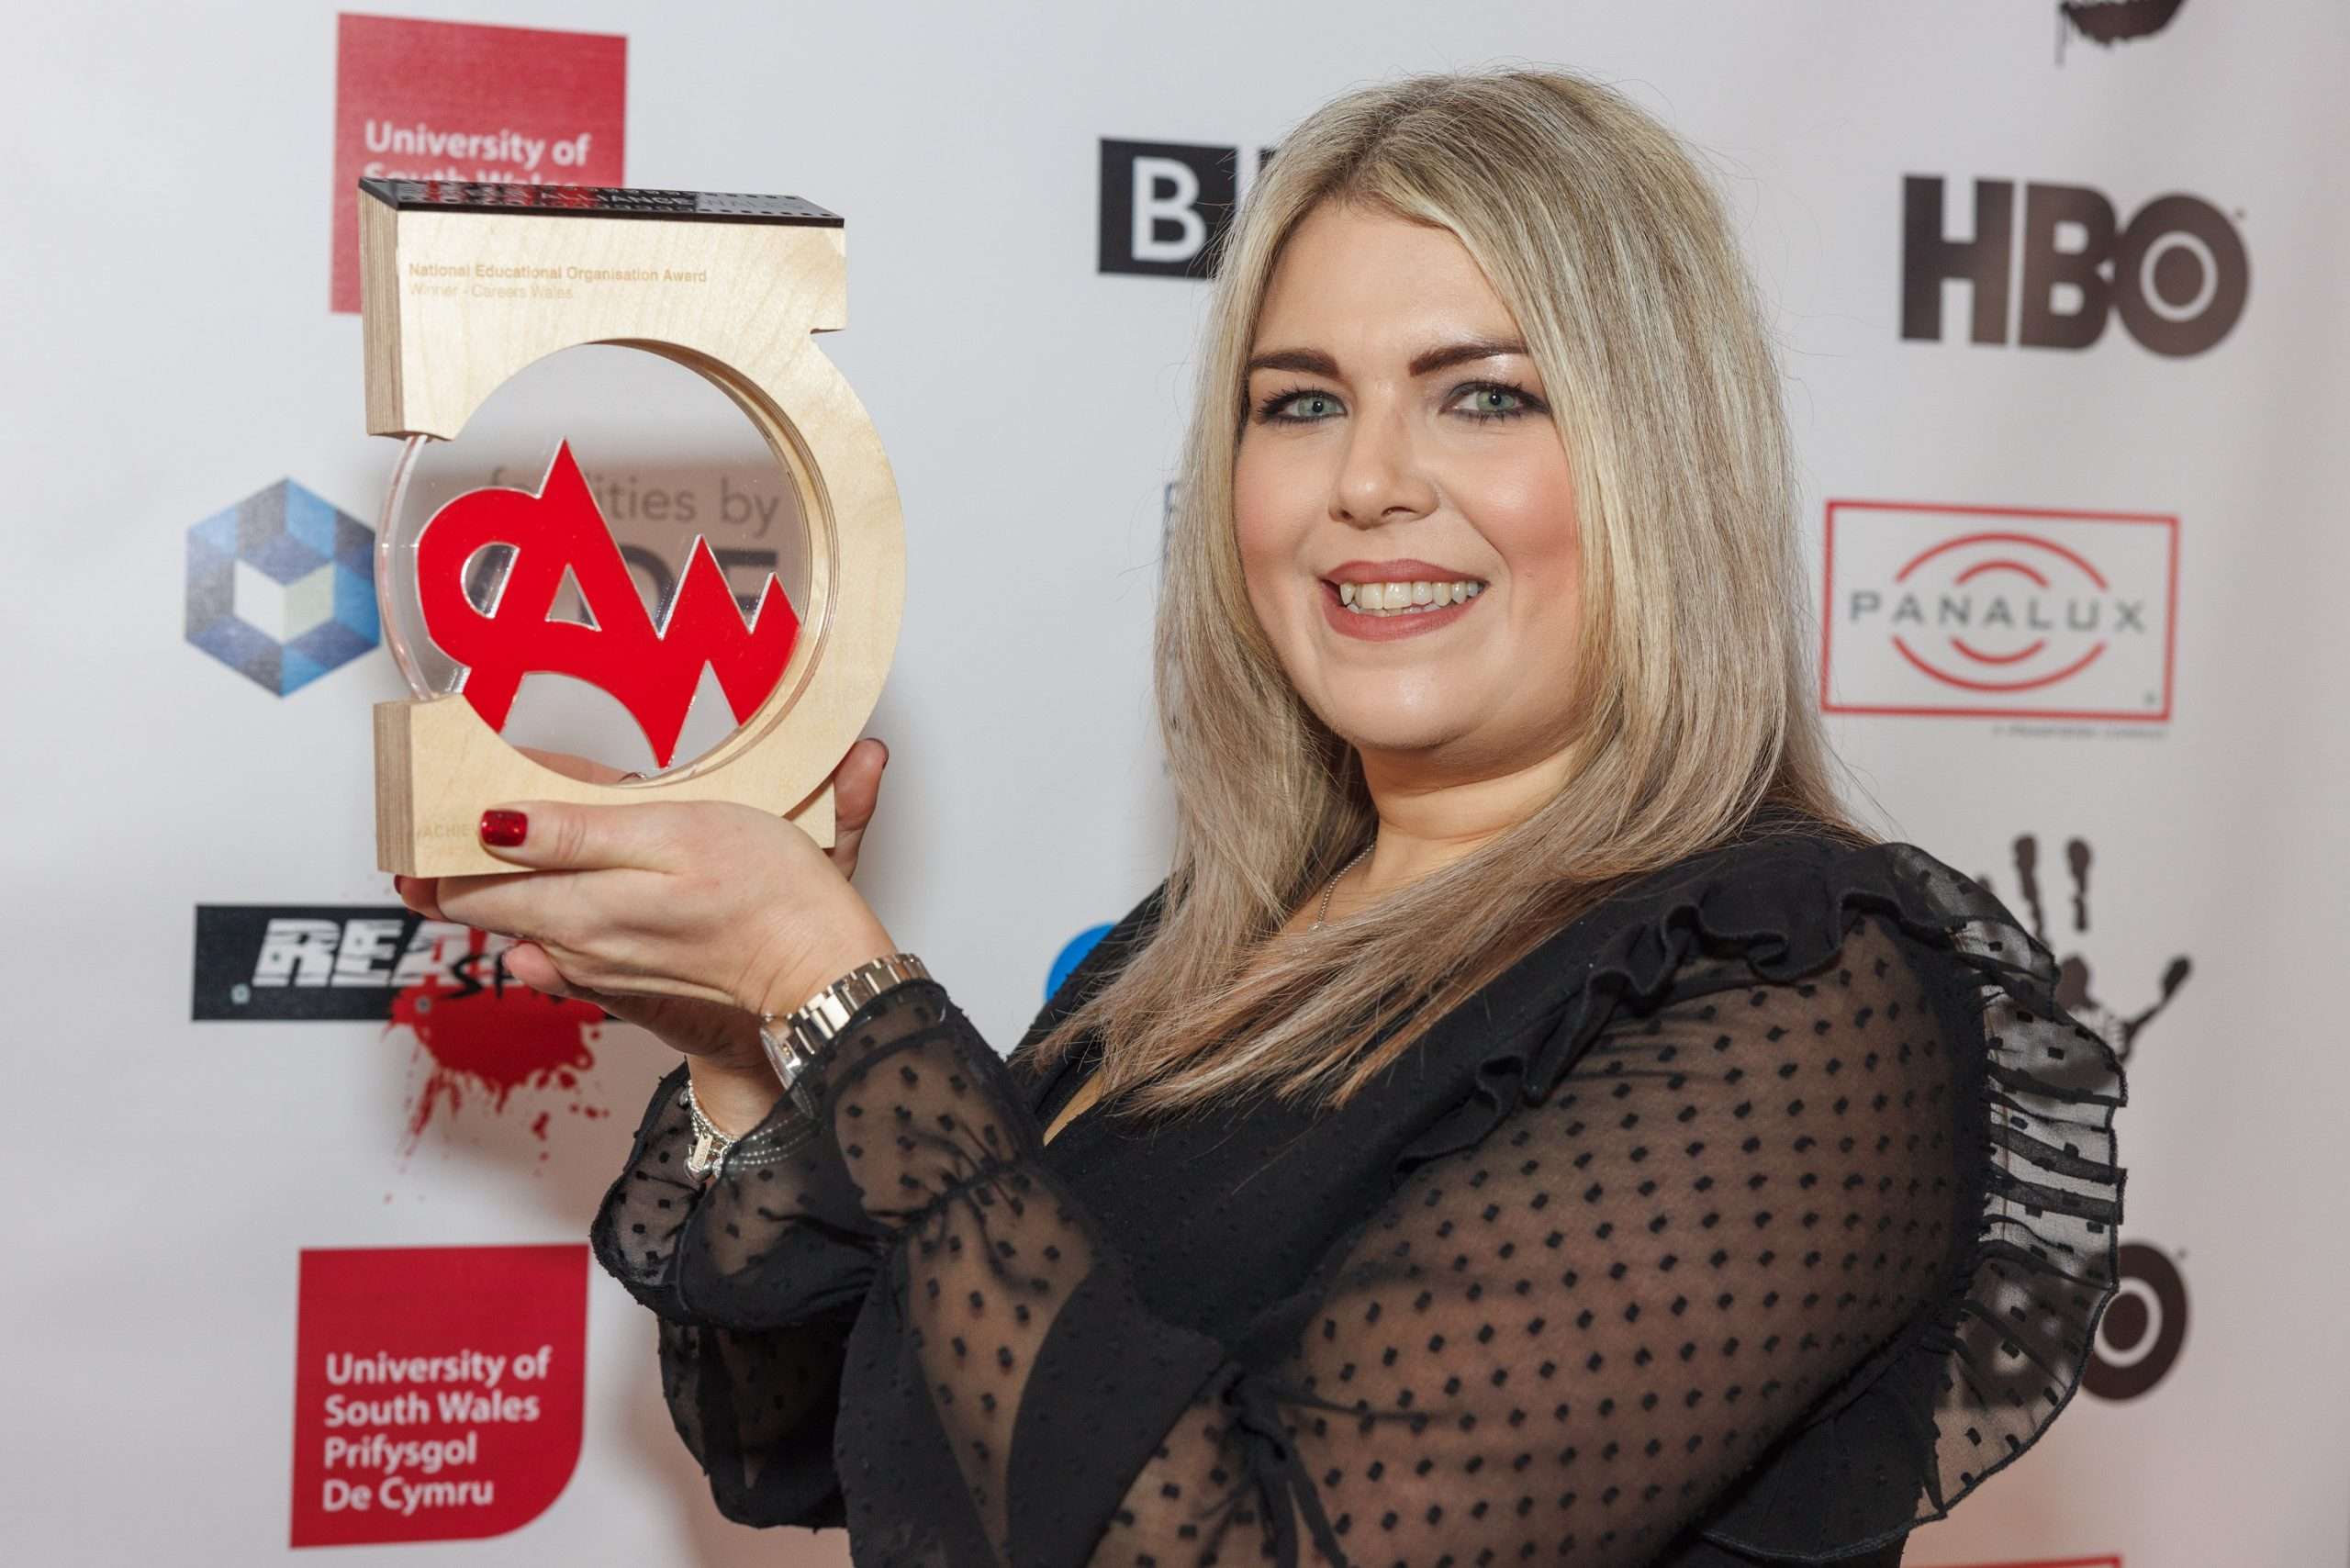 Careers Wales wins NEO award at Screen Alliance Wales Awards